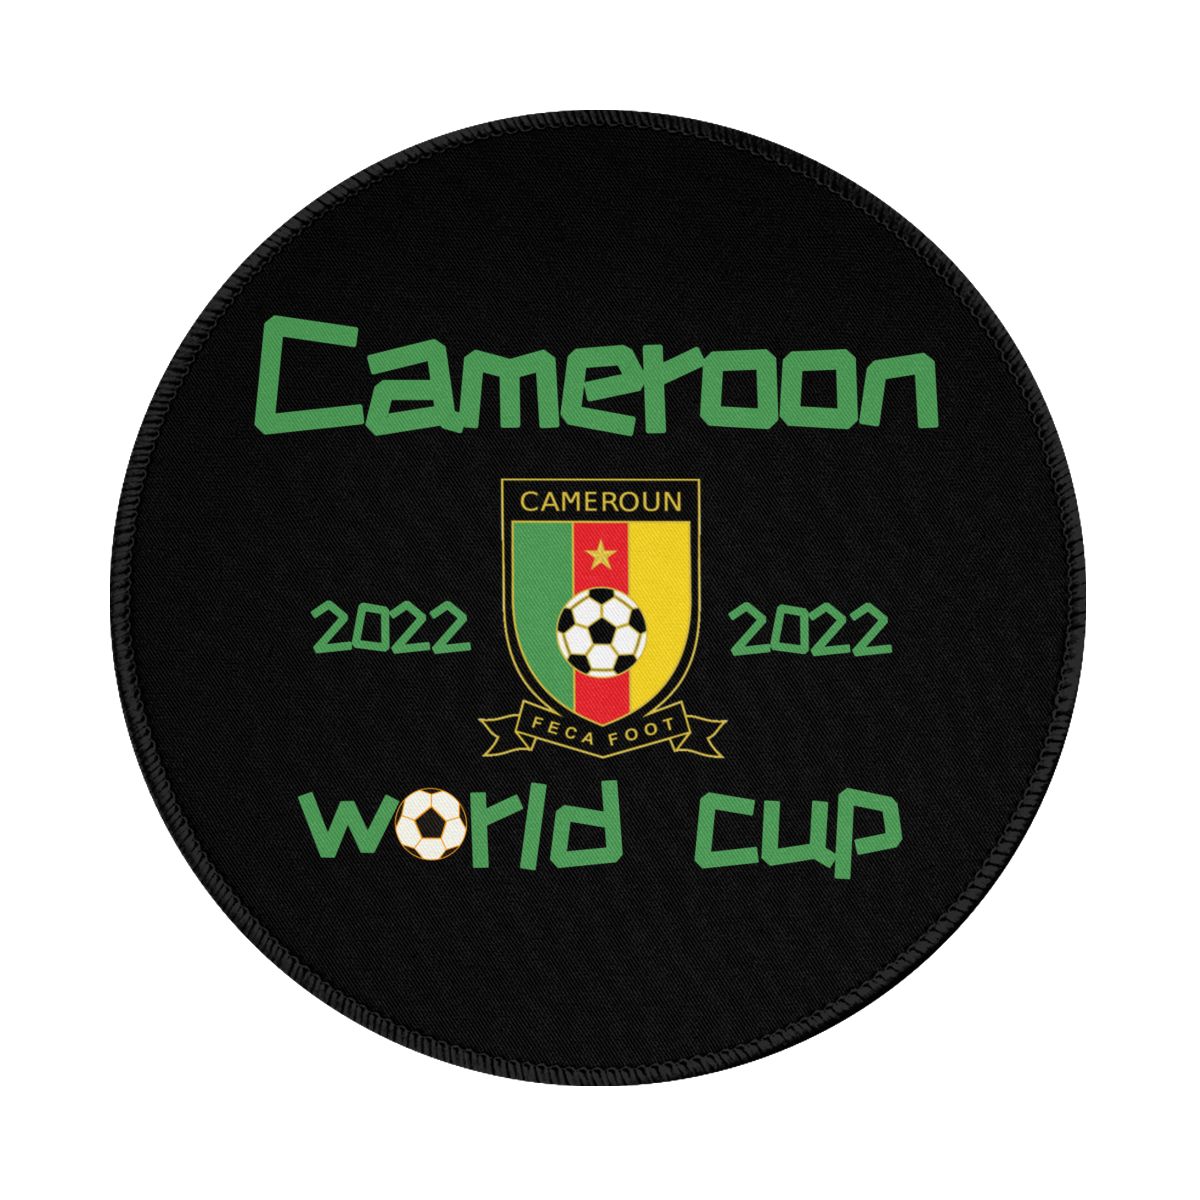 Cameroon 2022 World Cup Team Logo Gaming Round Mousepad for Computer Laptop